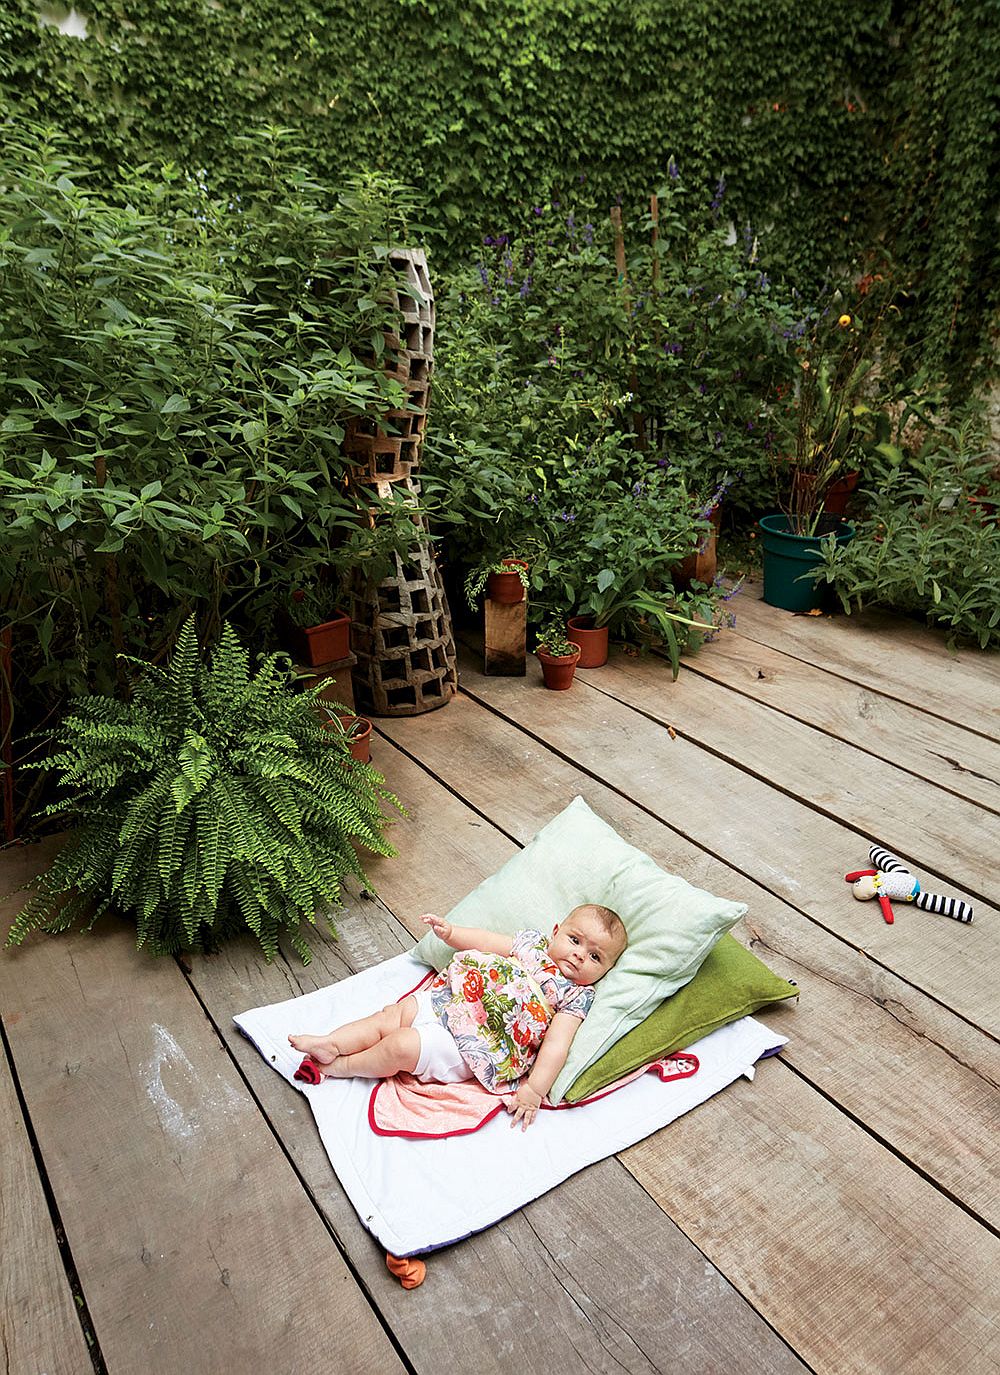 Wooden deck with greenery all around